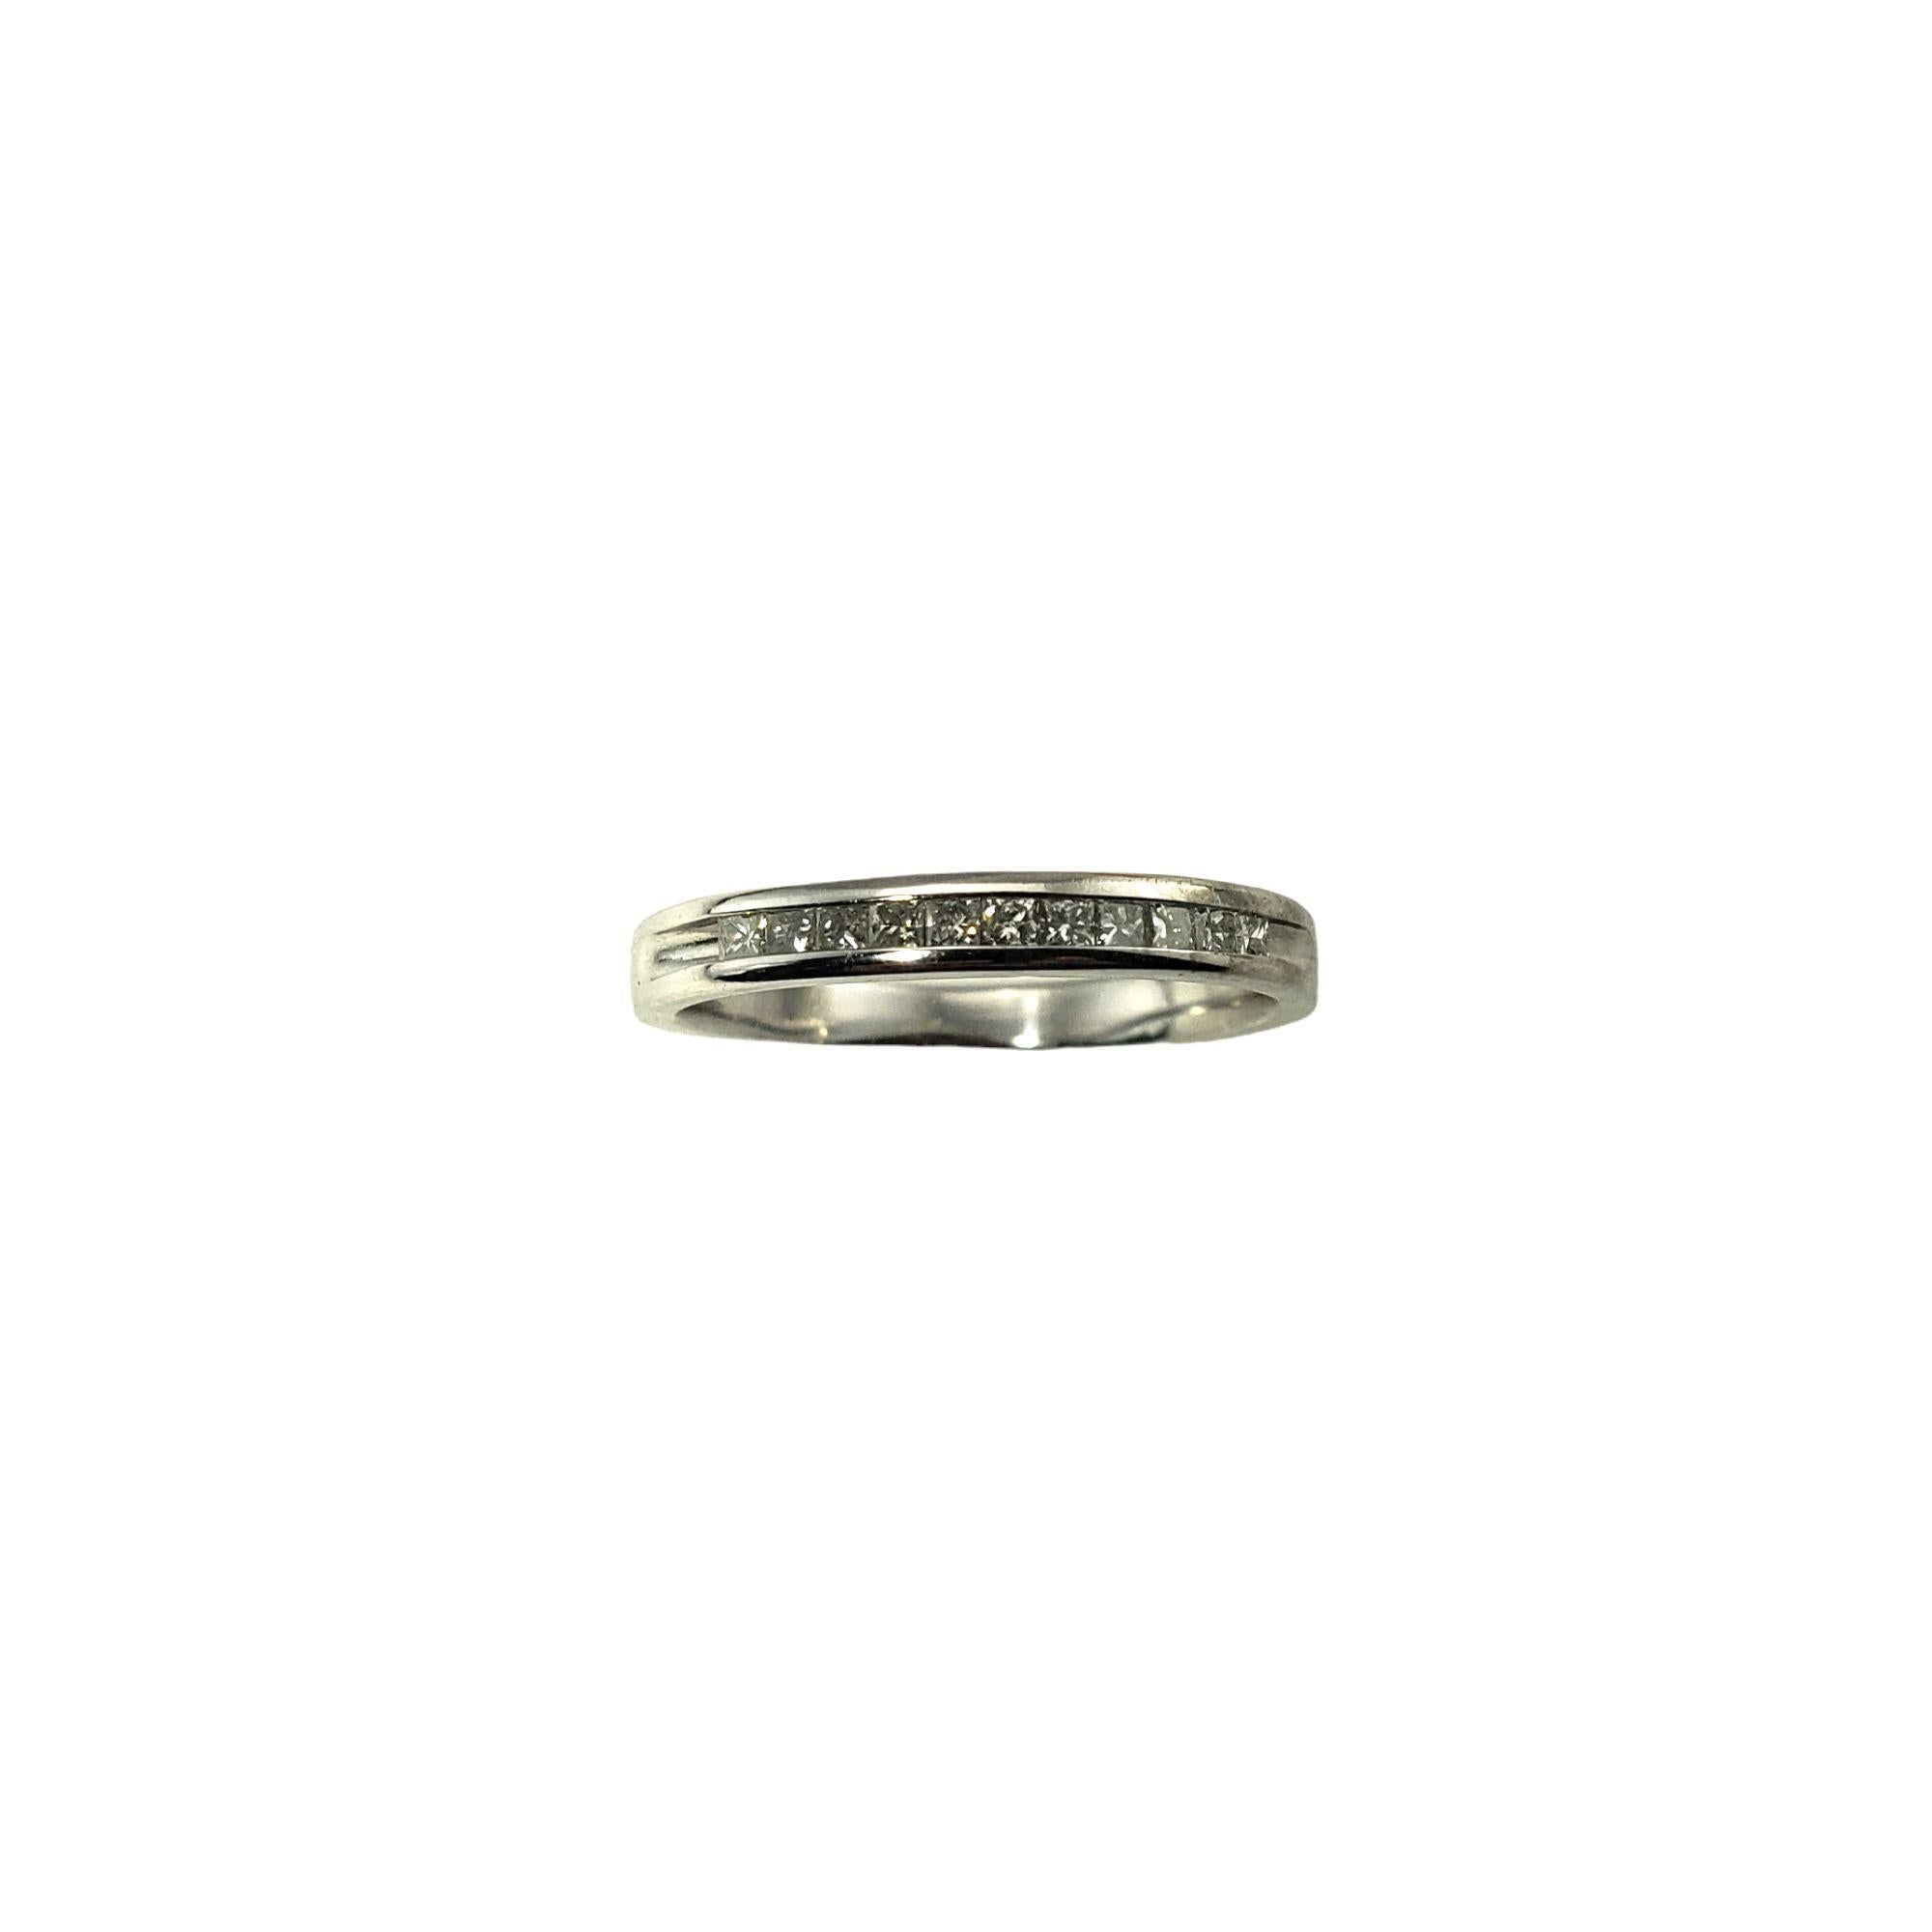 This sparkling band features ten princess cut diamonds set in classic 10K white gold.  Width:  2.5 mm.

Approximate total diamond weight:  .10 ct.

Diamond clarity: SI1-I1

Diamond color: I-J

Ring Size: 5.75

Weight:  1.2 dwt. /  1.9 gr.

Tested